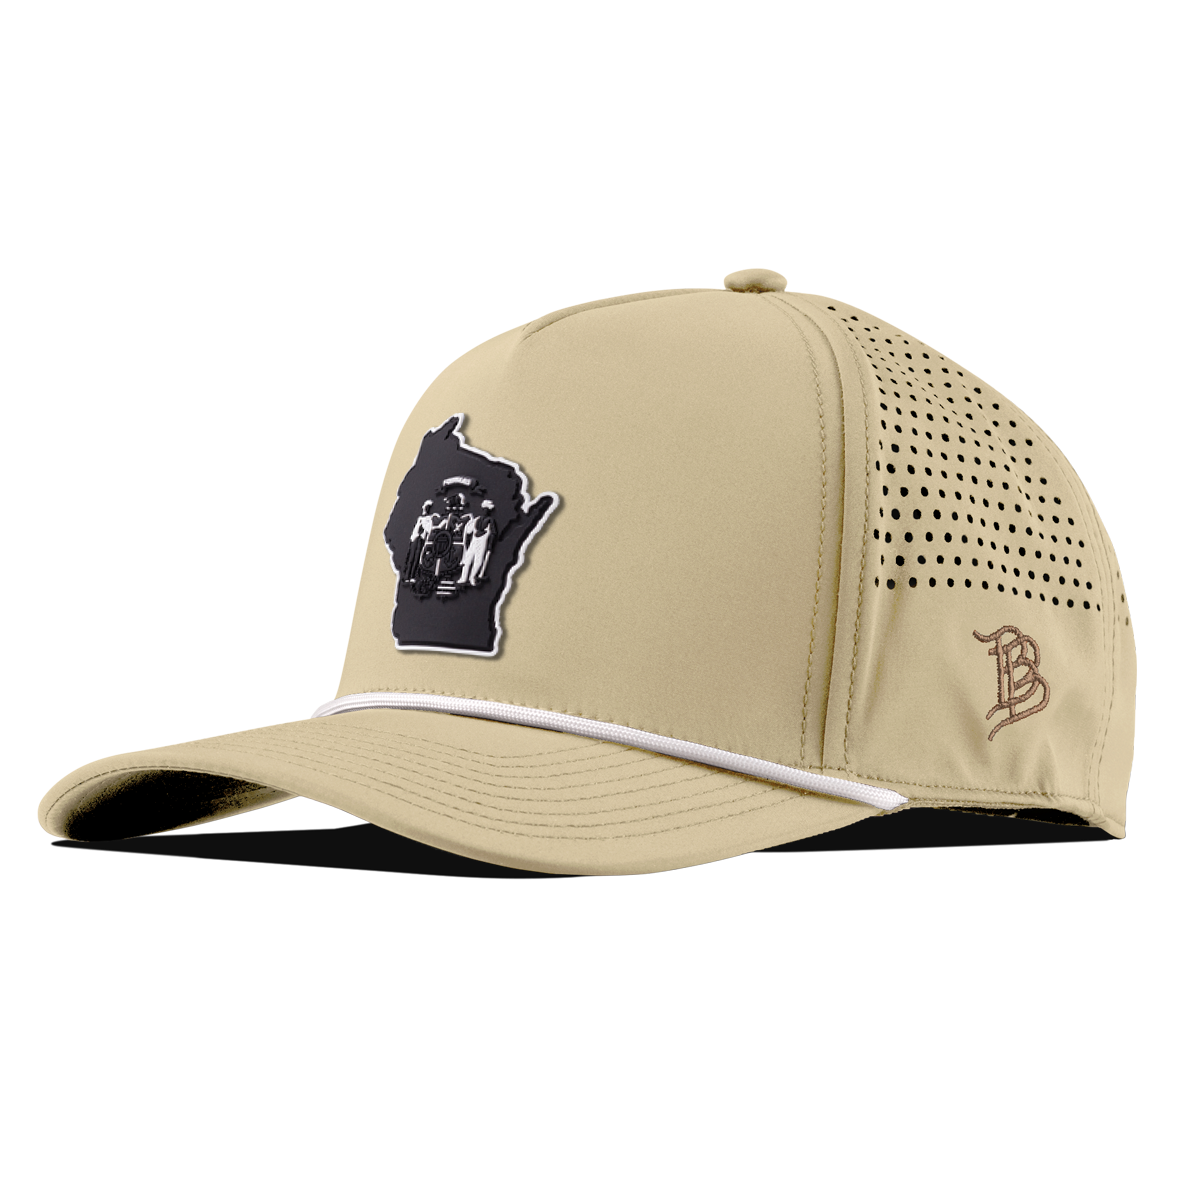 Wisconsin Vintage Curved 5 Panel Performance Desert/White